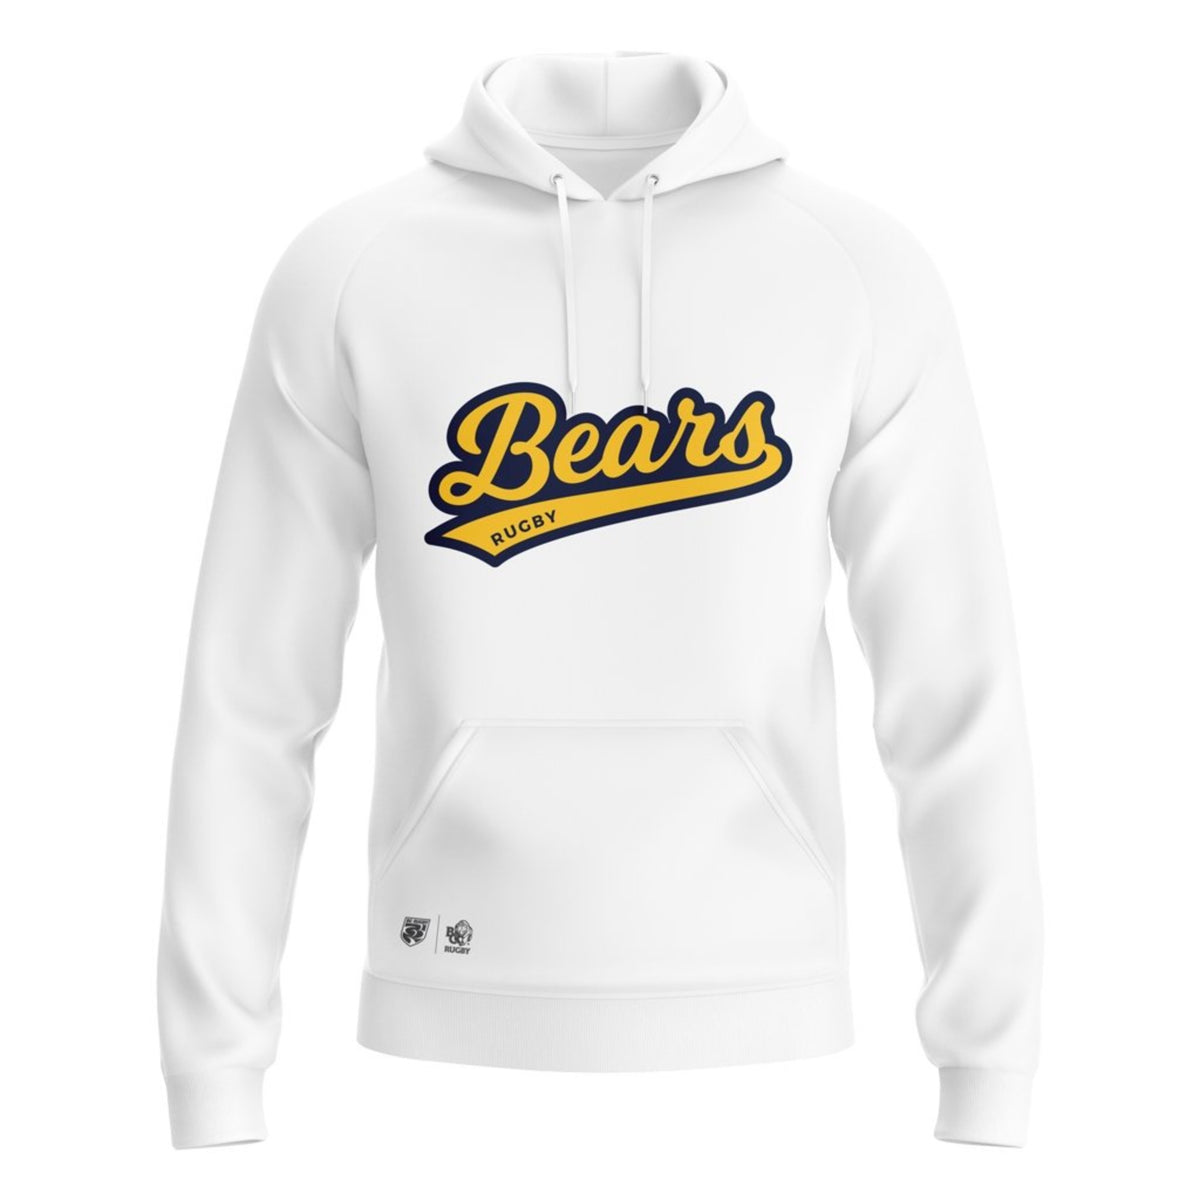 BC Rugby 2021 &quot;Bears&quot; Hoodie - Youth Unisex - www.therugbyshop.com www.therugbyshop.com YOUTH / WHITE / S XIX Brands HOODIES BC Rugby 2021 &quot;Bears&quot; Hoodie - Youth Unisex